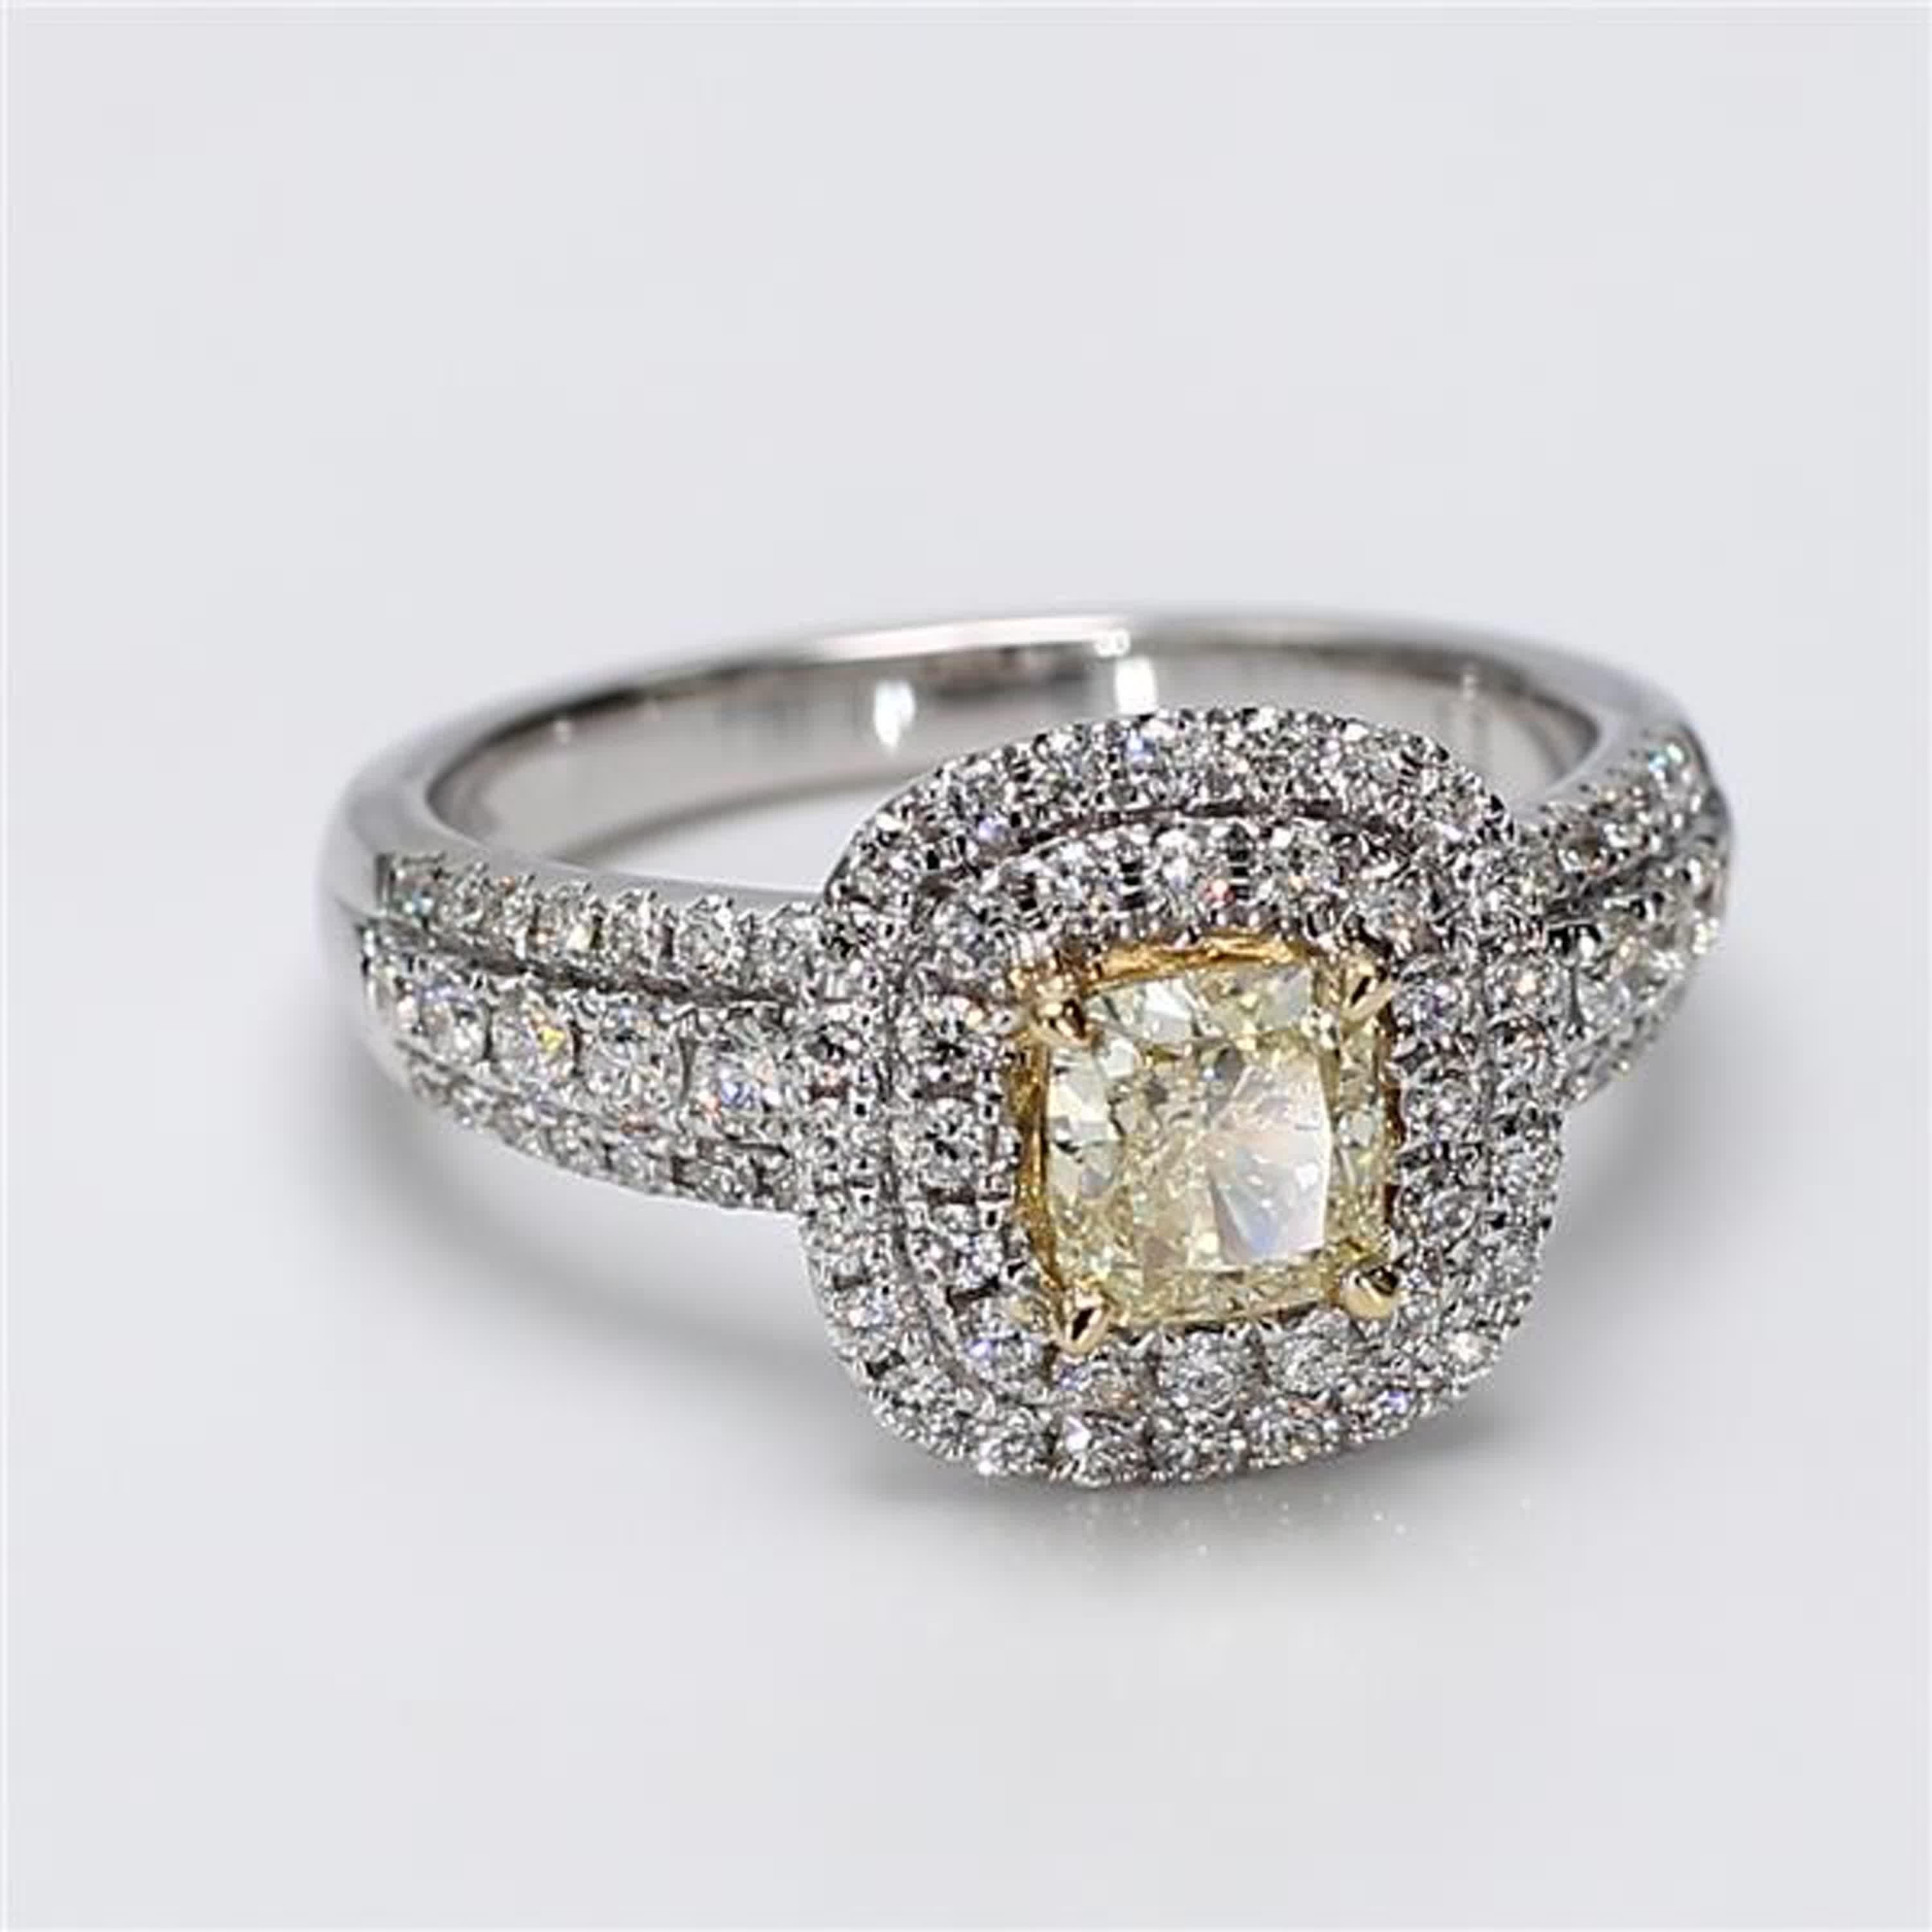 Natural Yellow Cushion and White Diamond 1.32 Carat TW Gold Cocktail Ring For Sale 1